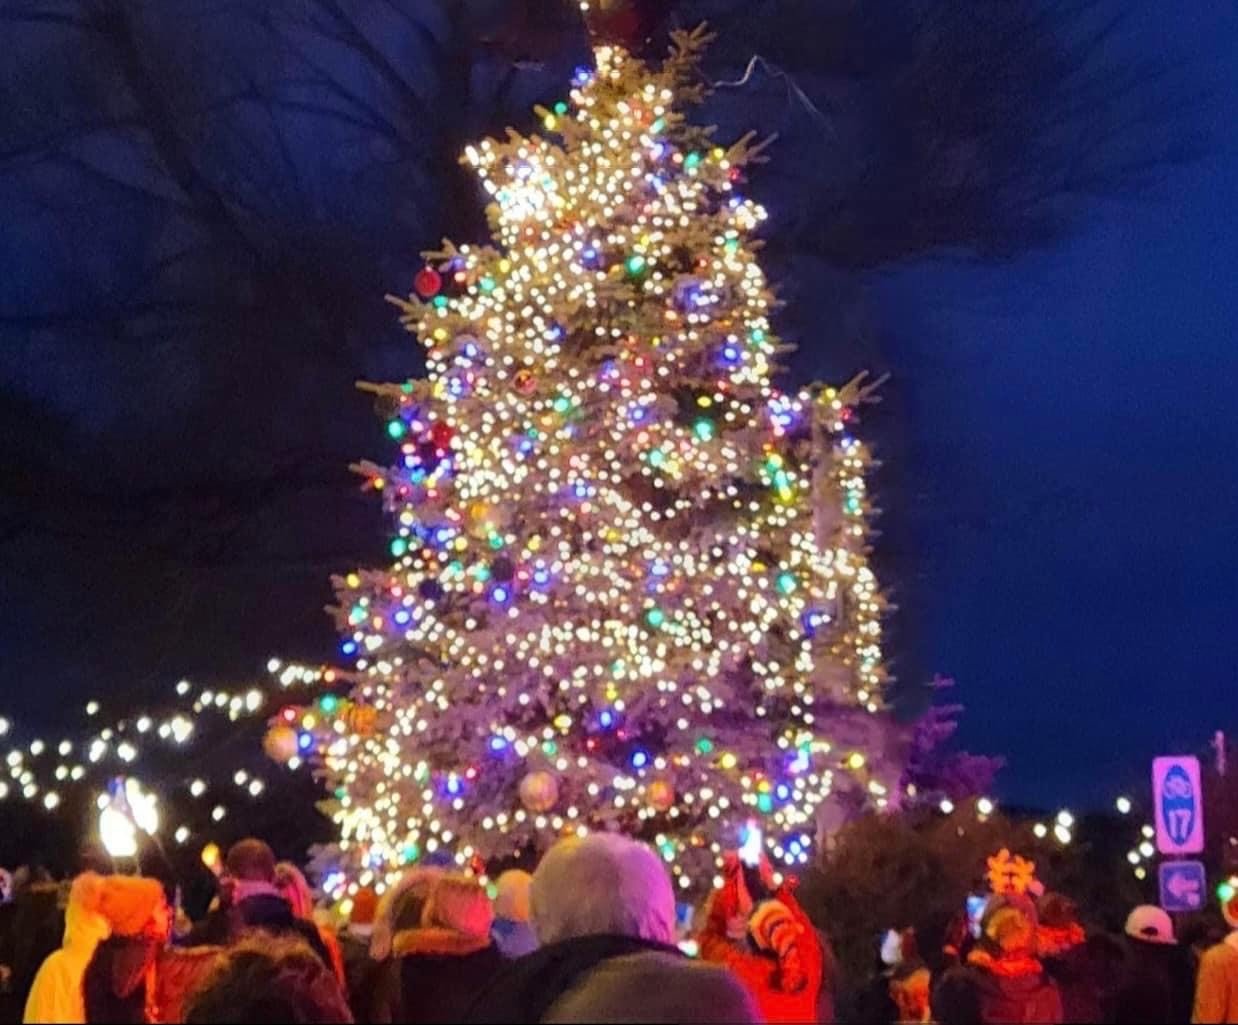 Bemus Point Business Association to Host Light Up the Point Holiday Celebration